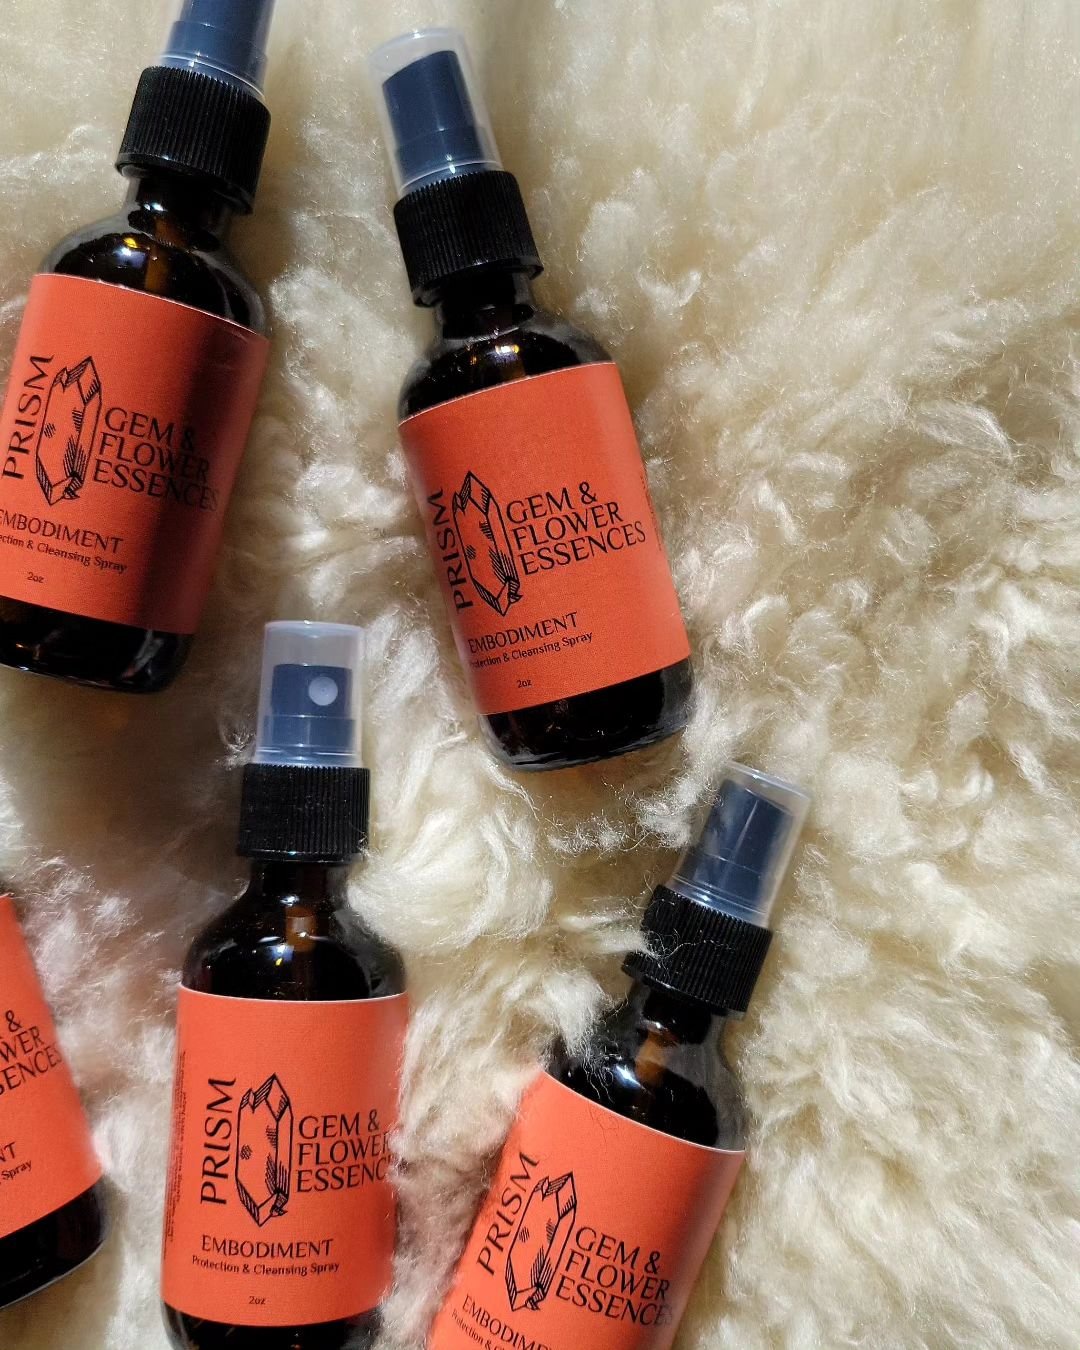 EMBODIMENT // Welcoming Taurus season on this Venusian day by releasing this long-time coming protection, cleansing, and grounding spray 🌸

Claim your energetic boundaries through conscious embodiment and awareness with this sacred blend of gem and 